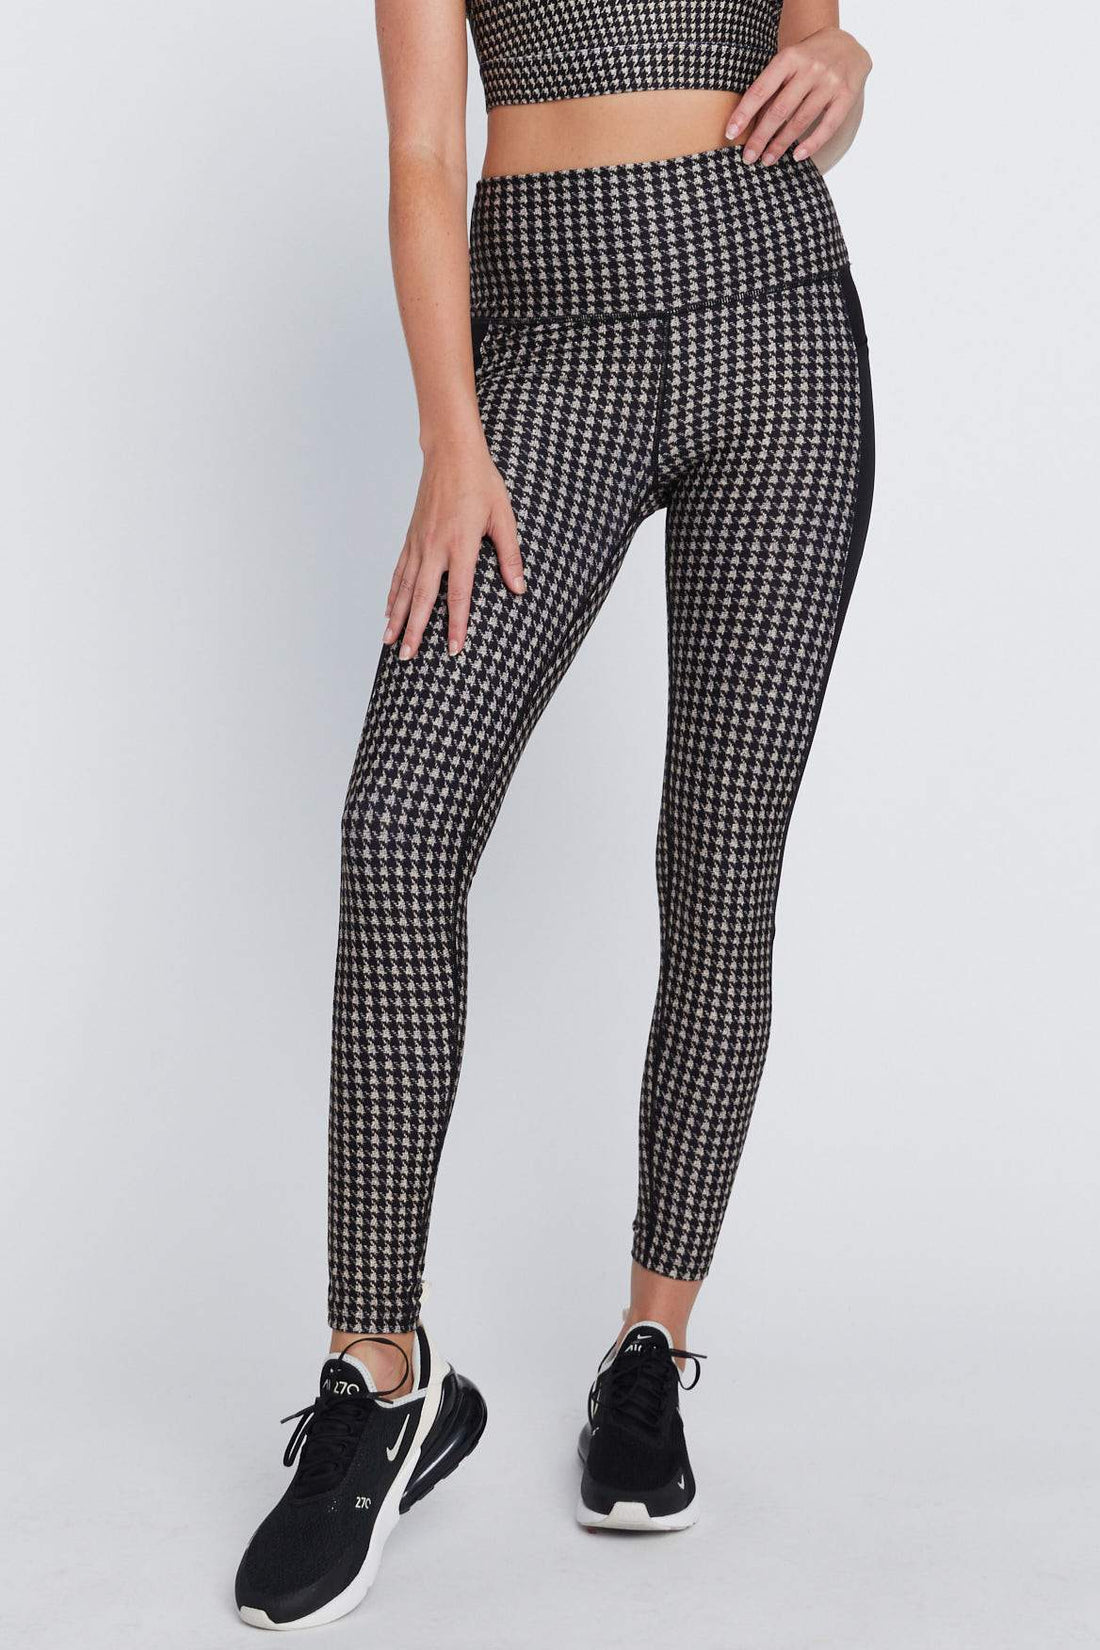 Modern Houndstooth Leggings, Leggings Hahnentrittmuster, Hounds Tooth  Stretch Pants, Printed Leggings, Yoga Pants, Workout Leggings 